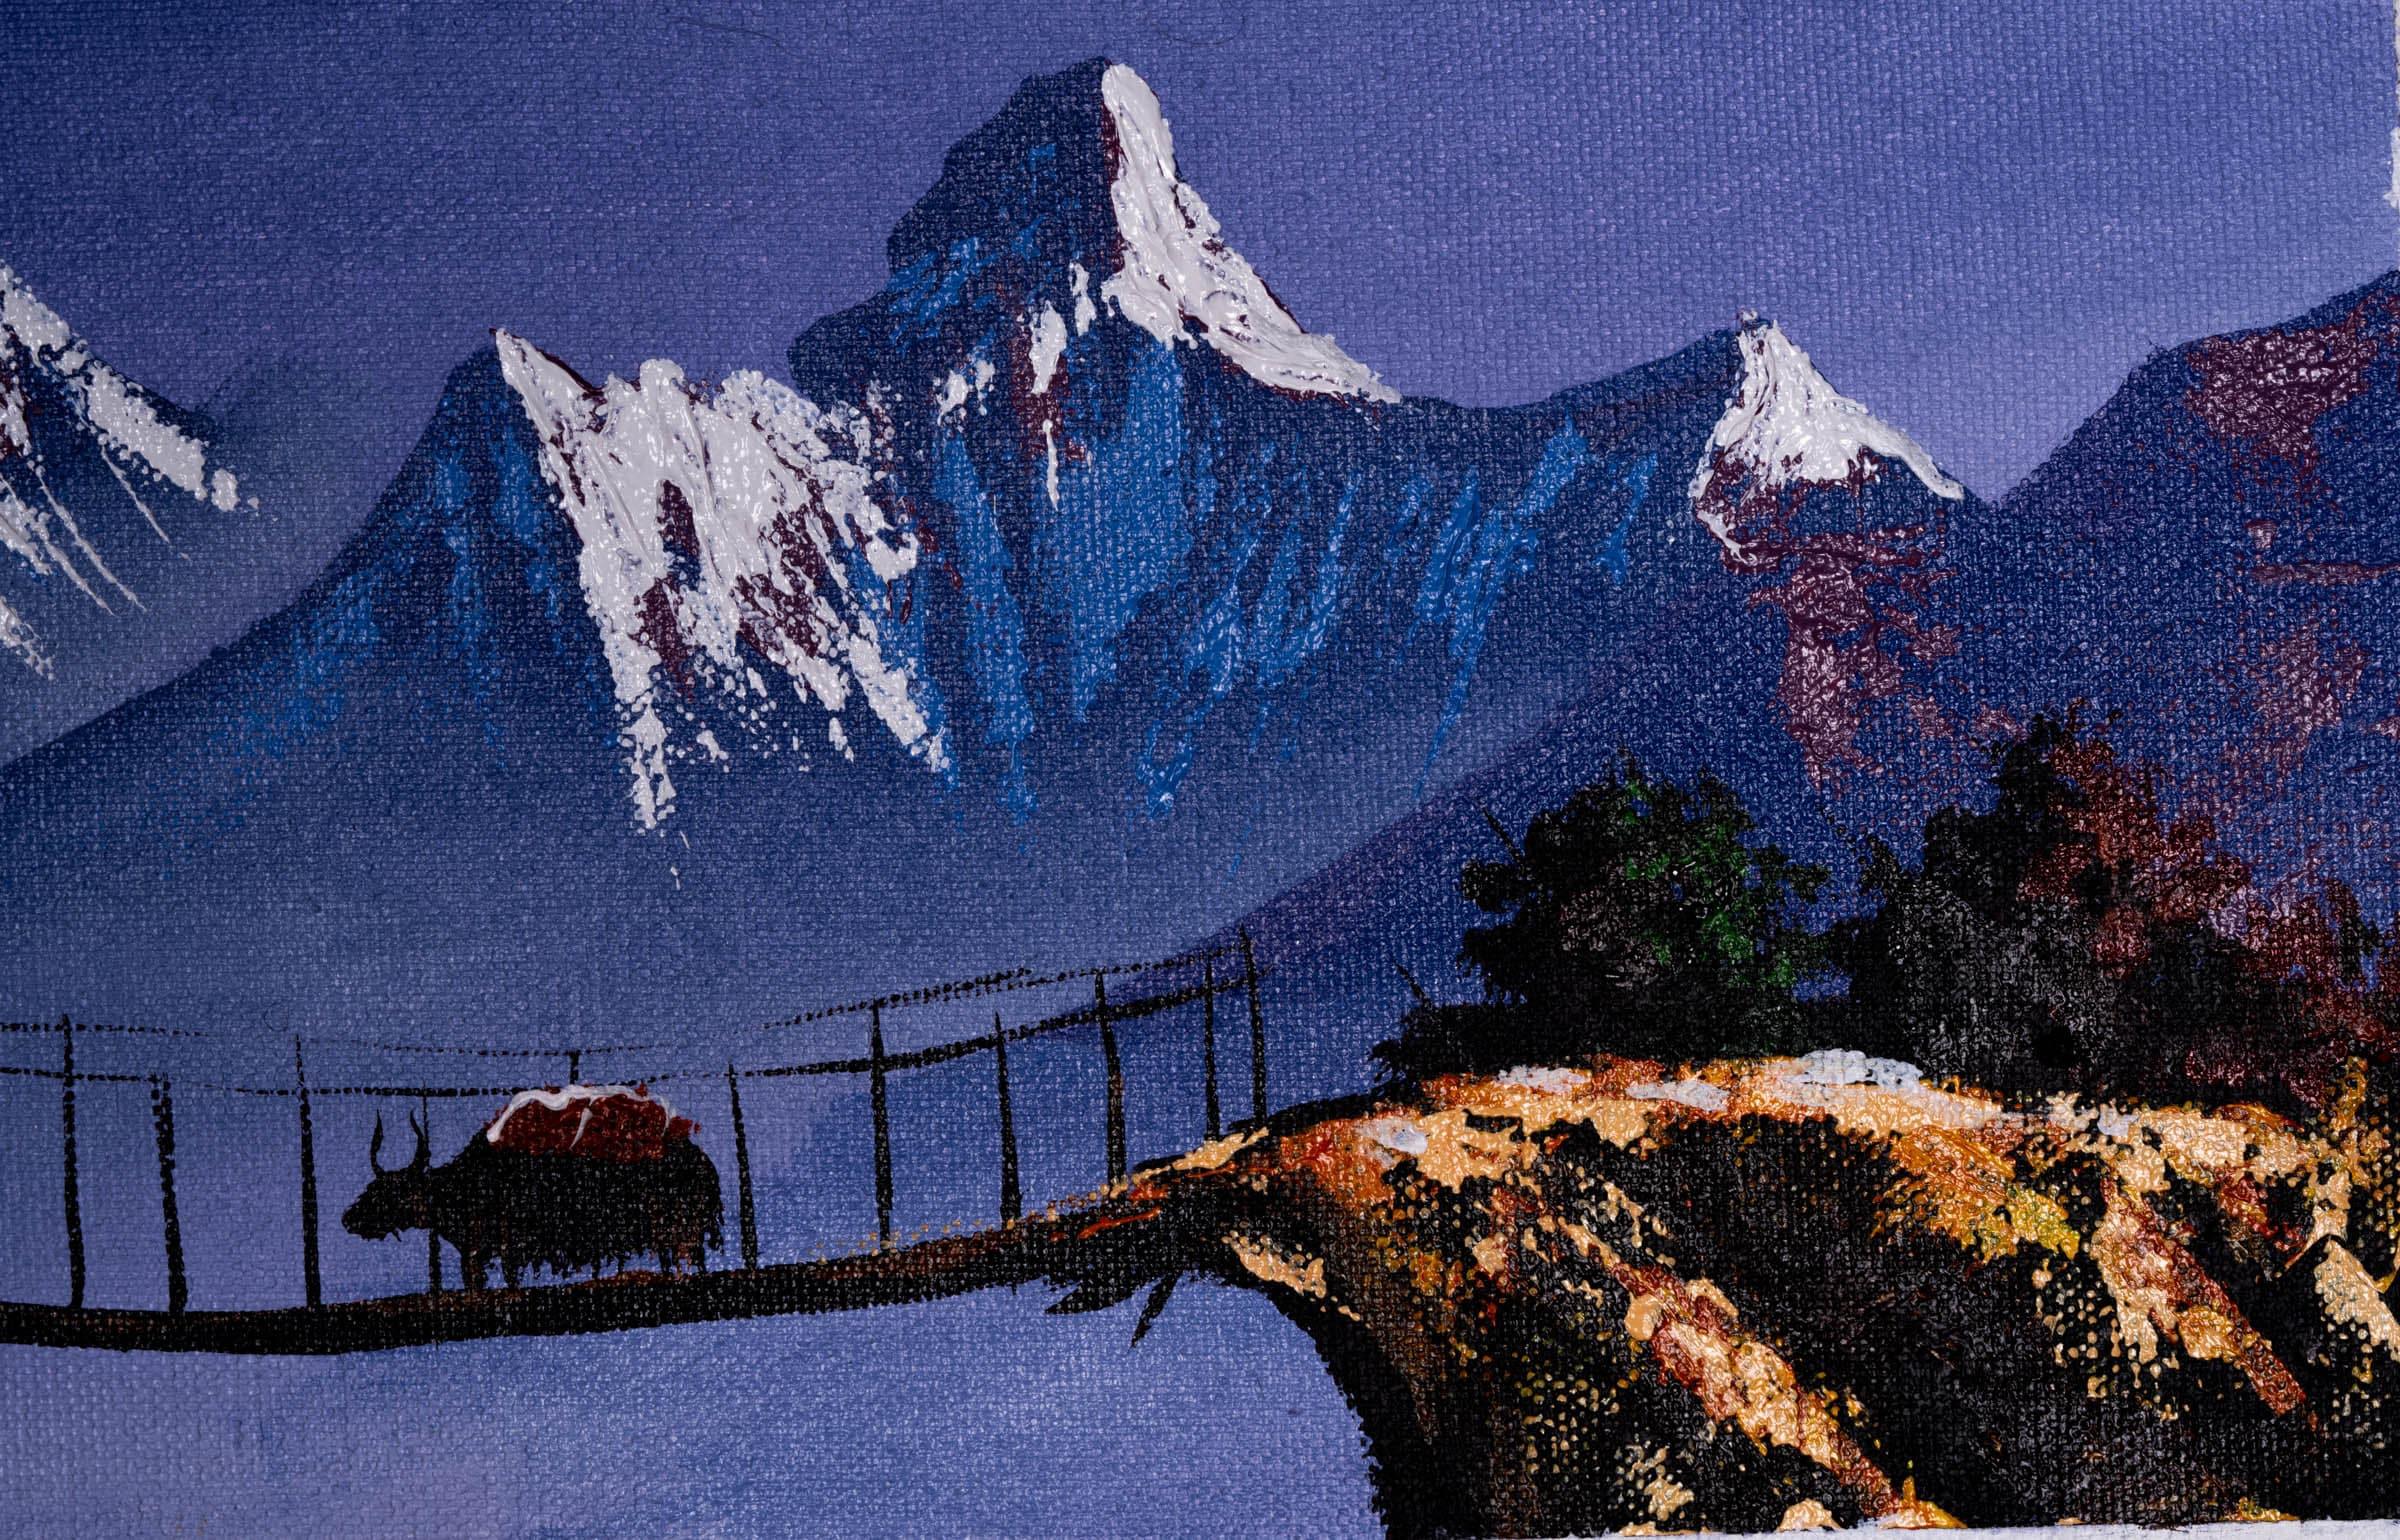 Oil Painting of Mount Ama Dablam and Mount Everest - Himalayas Shop